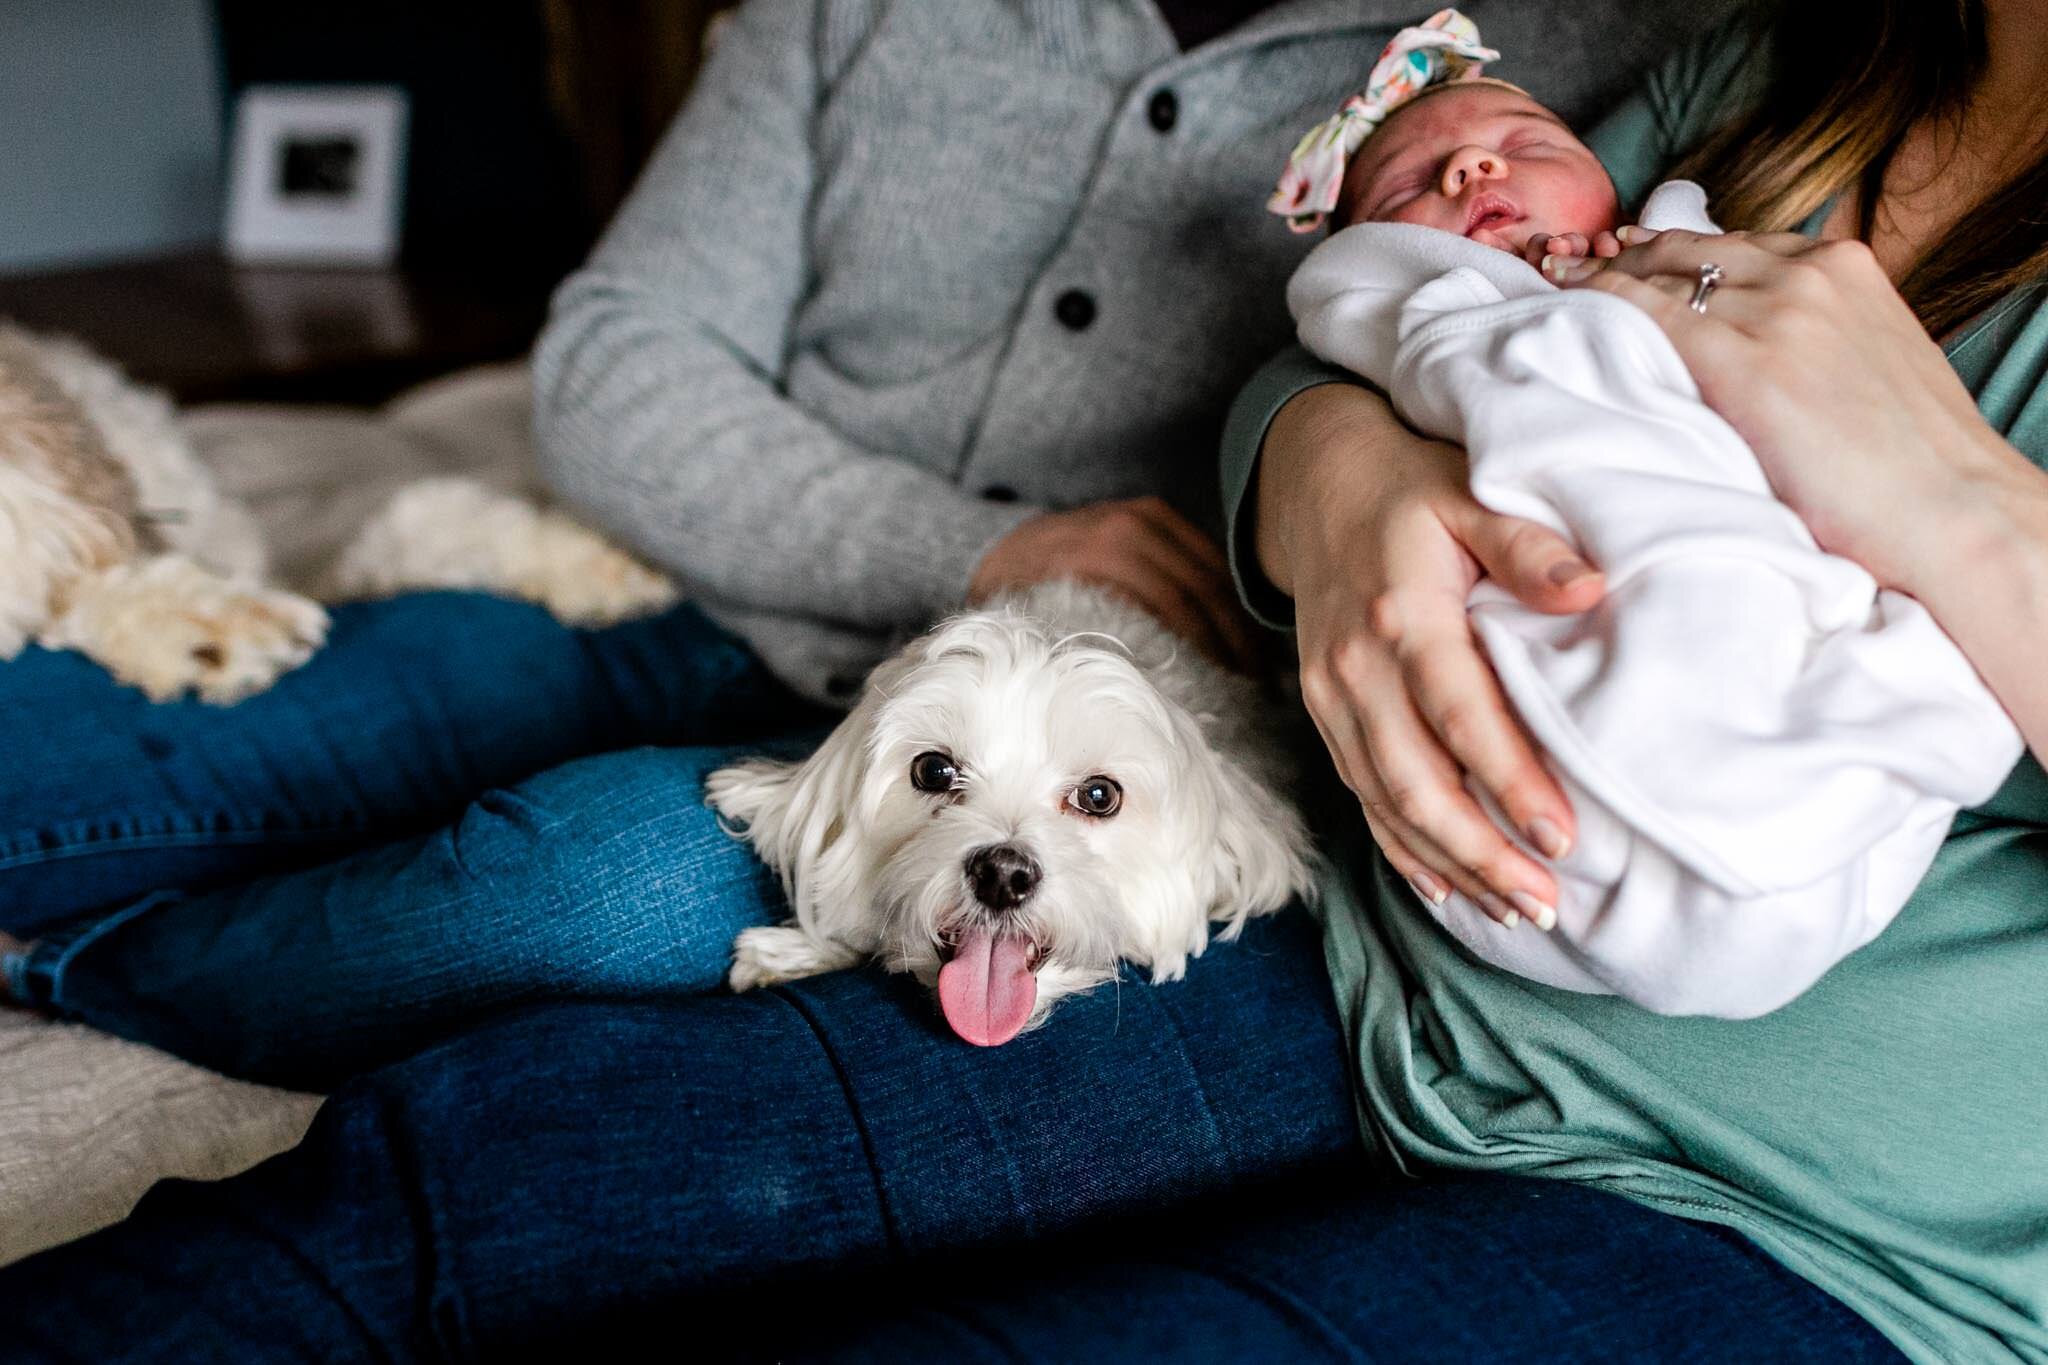 Durham Newborn Photographer | By G. Lin Photography | White dog with tongue sticking out